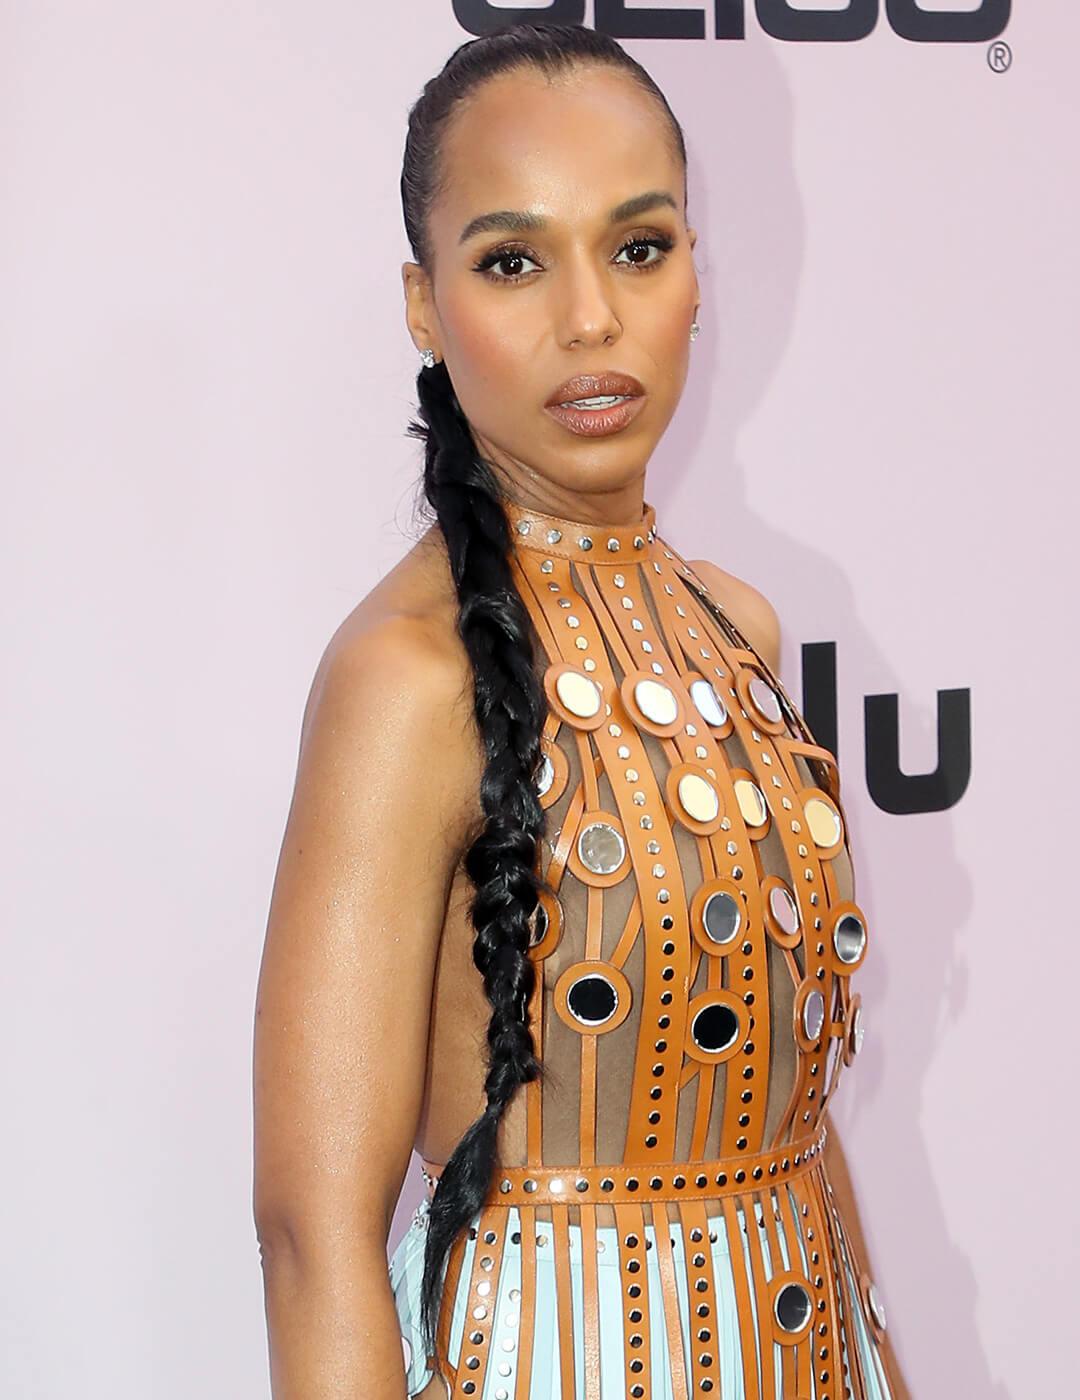 Kerry Washington in caramel leather strapped dress rocking a tousled, side-swept braided ponytail hairstyle